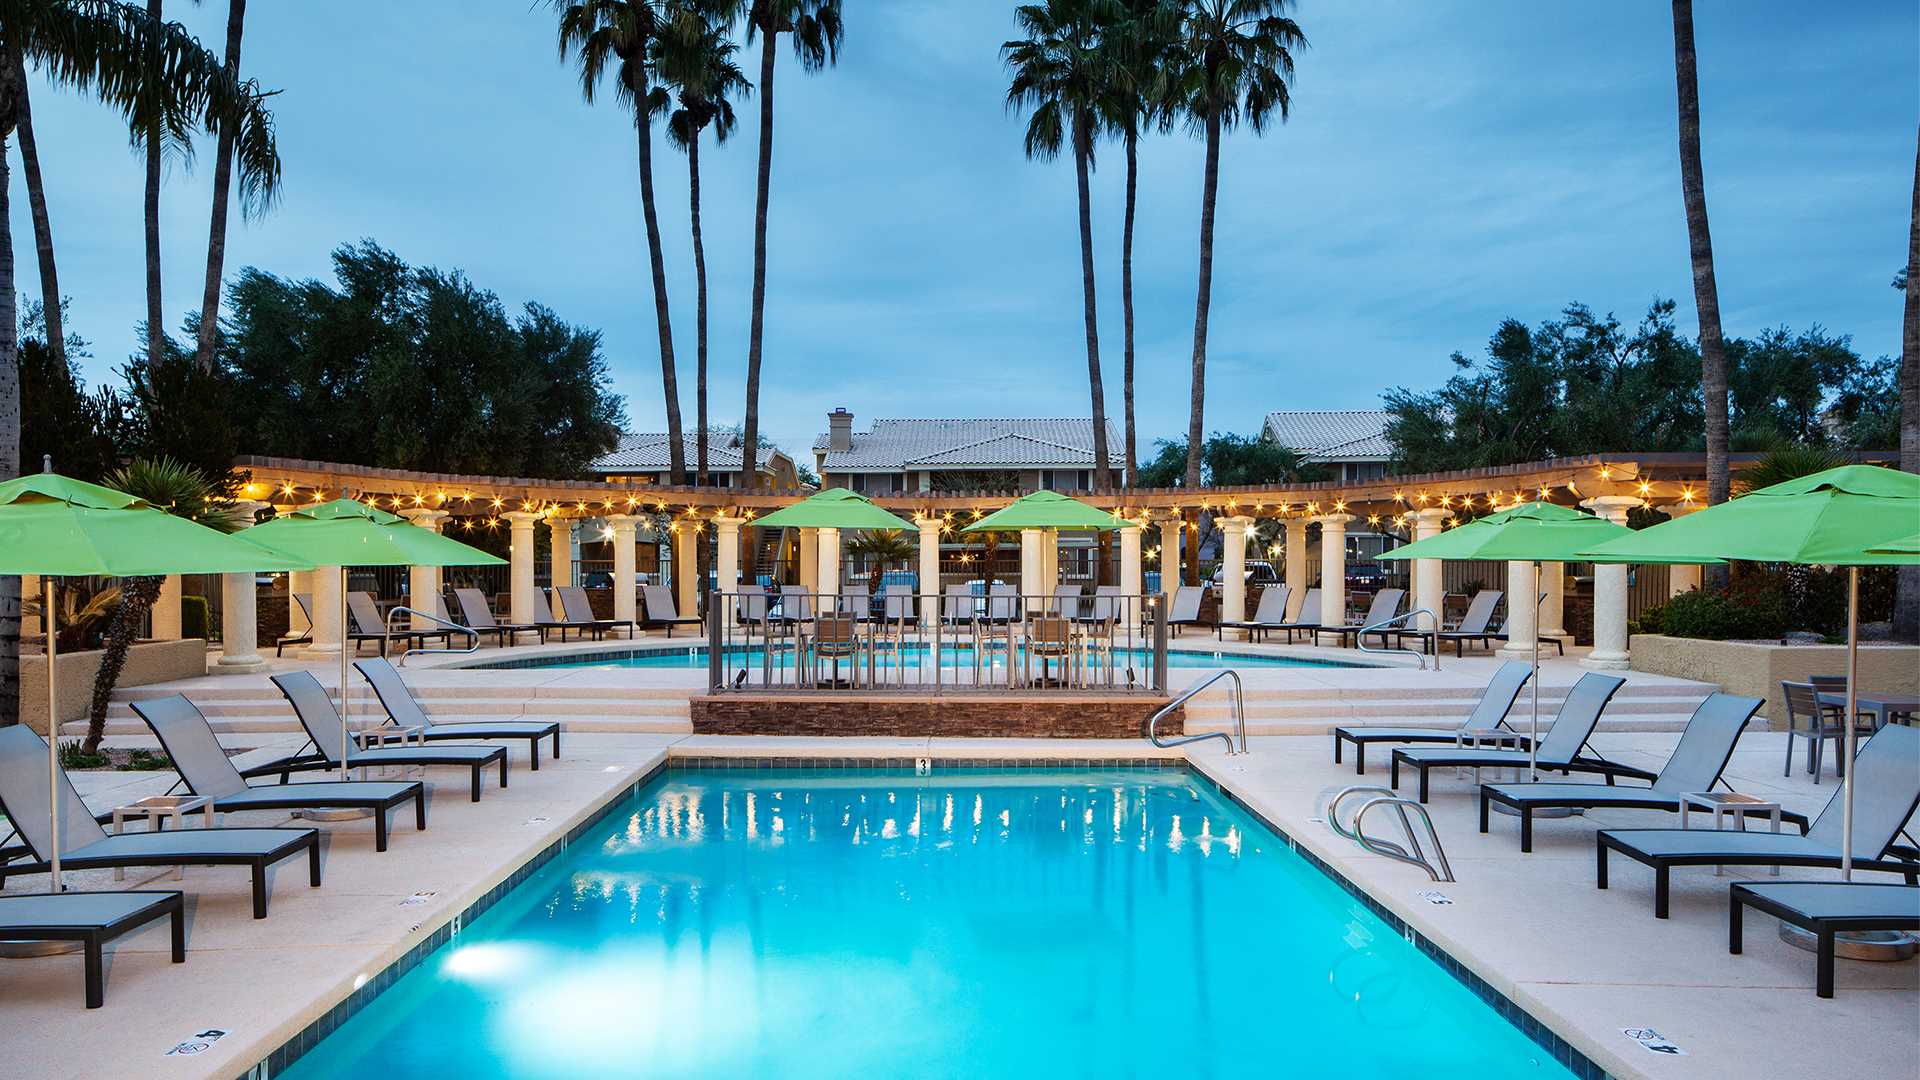 San Carlos Apartments in Old Town Scottsdale - Outdoor swimming pool